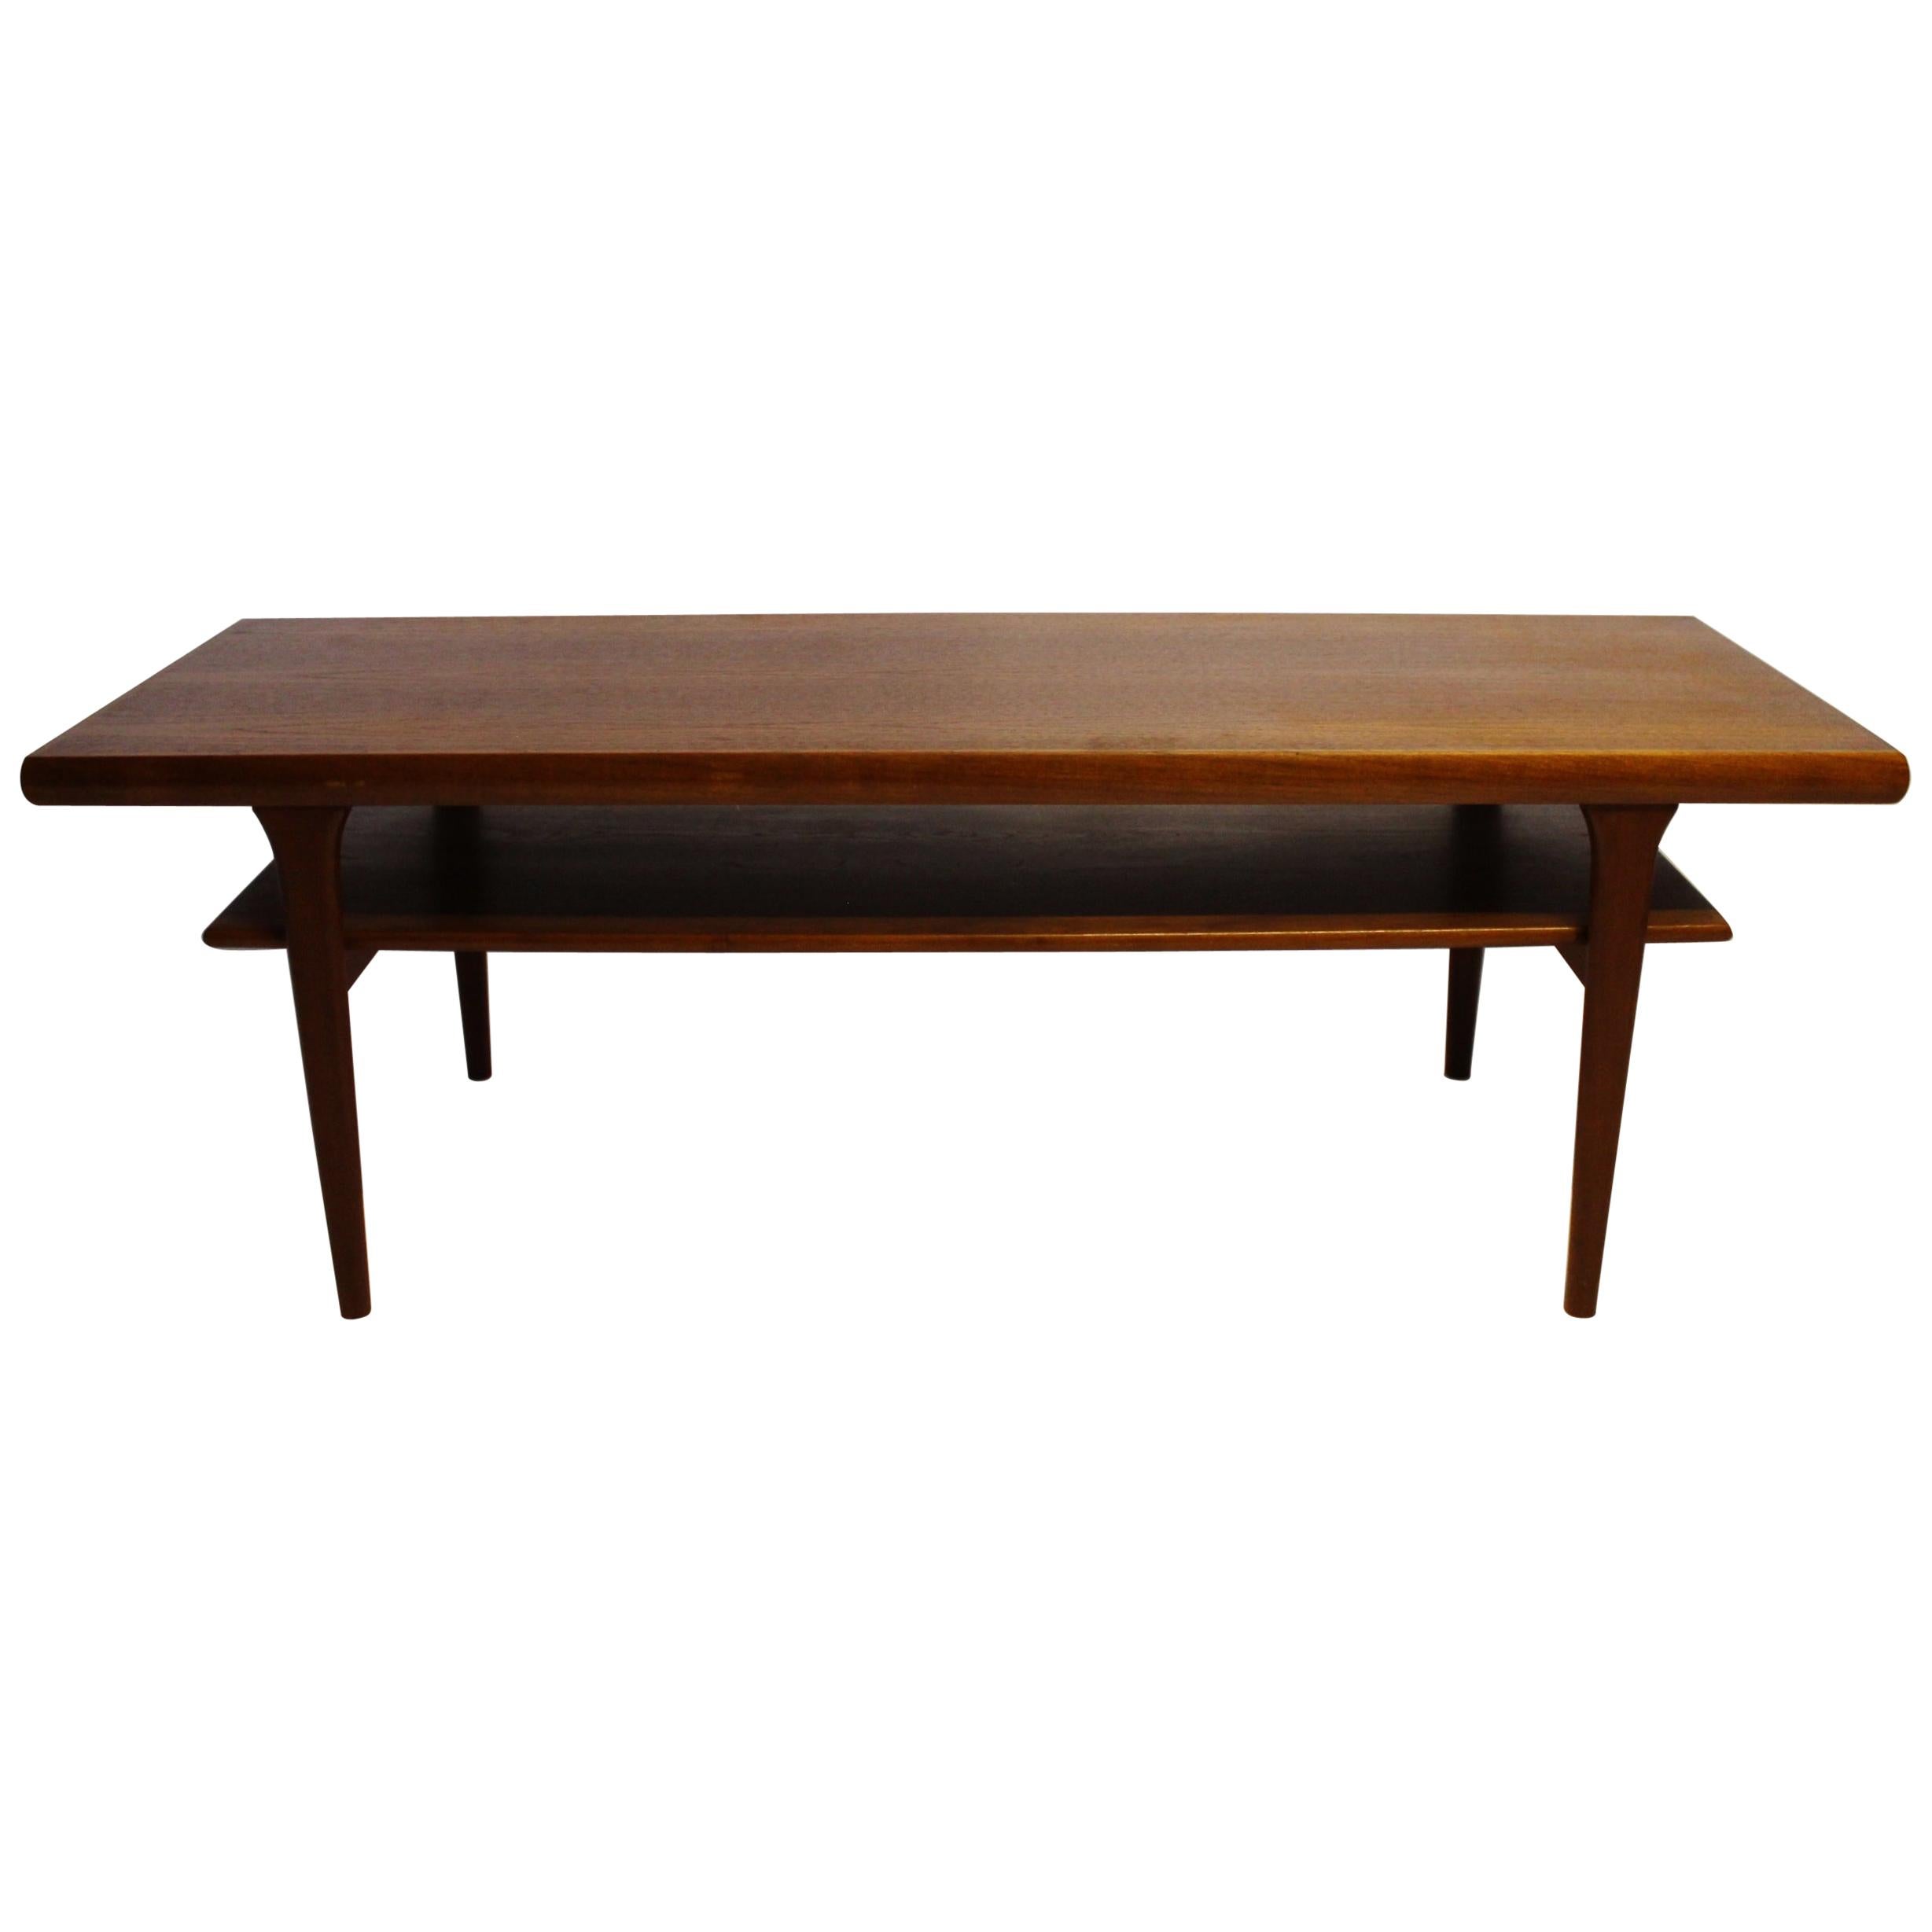 Coffee Table with Shelf in Teak of Danish Design from the 1960s